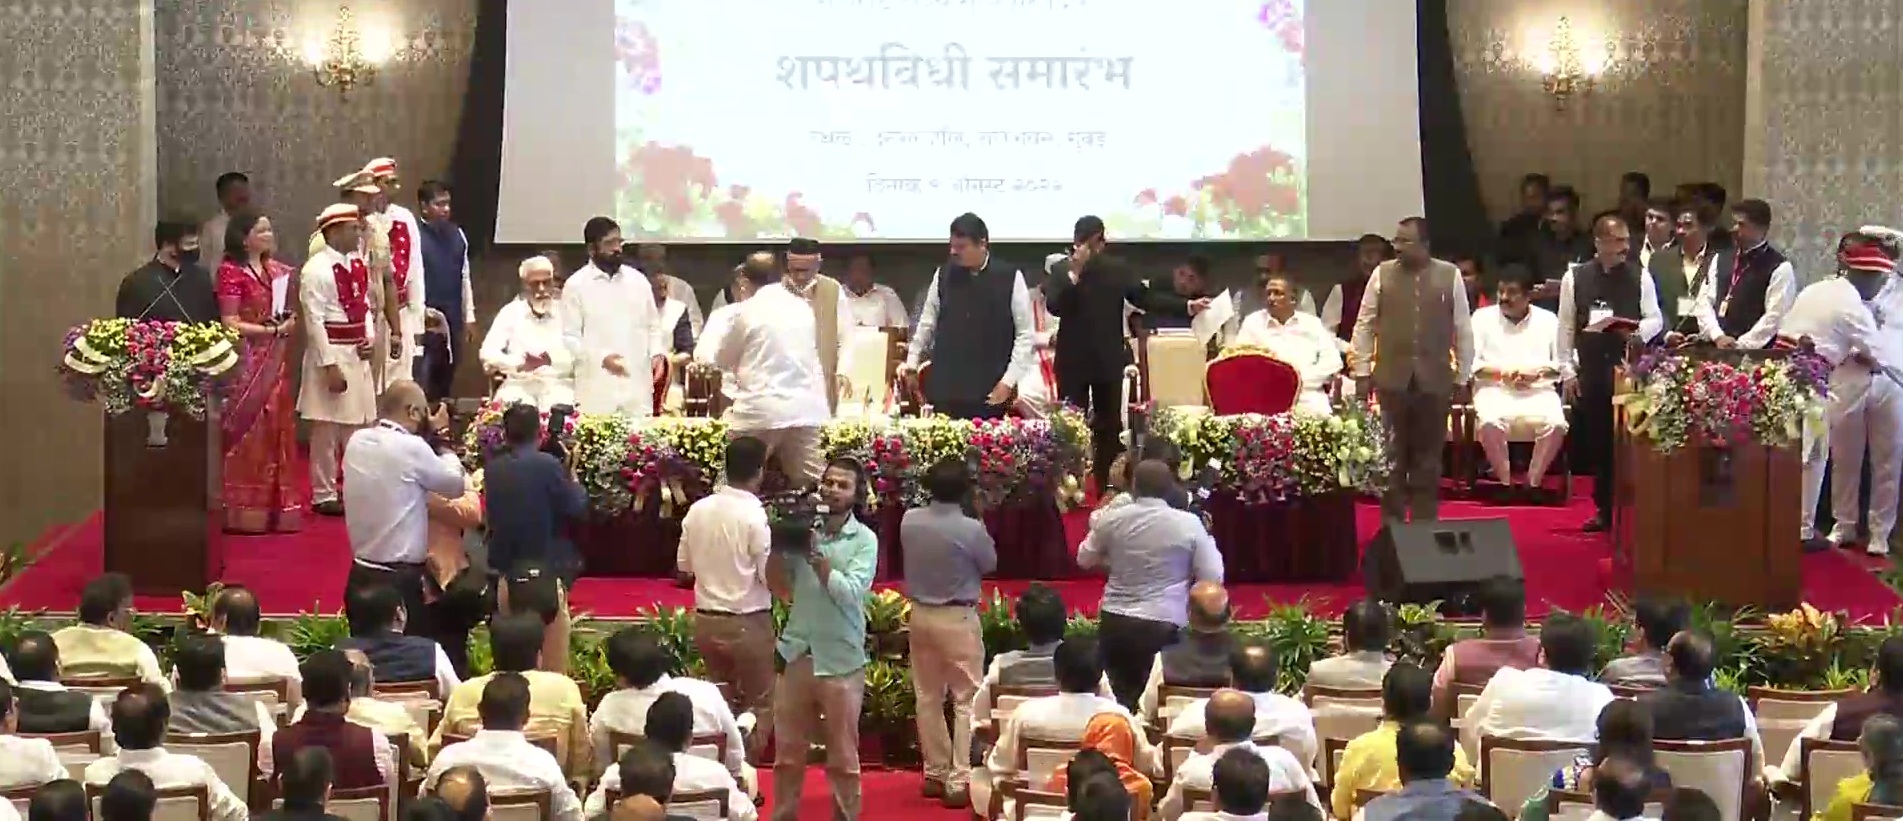 Maharashtra Cabinet Expansion: Governor Bhagat Singh Koshyari Administers The Oath Of Office To 18 MLAs As Ministers